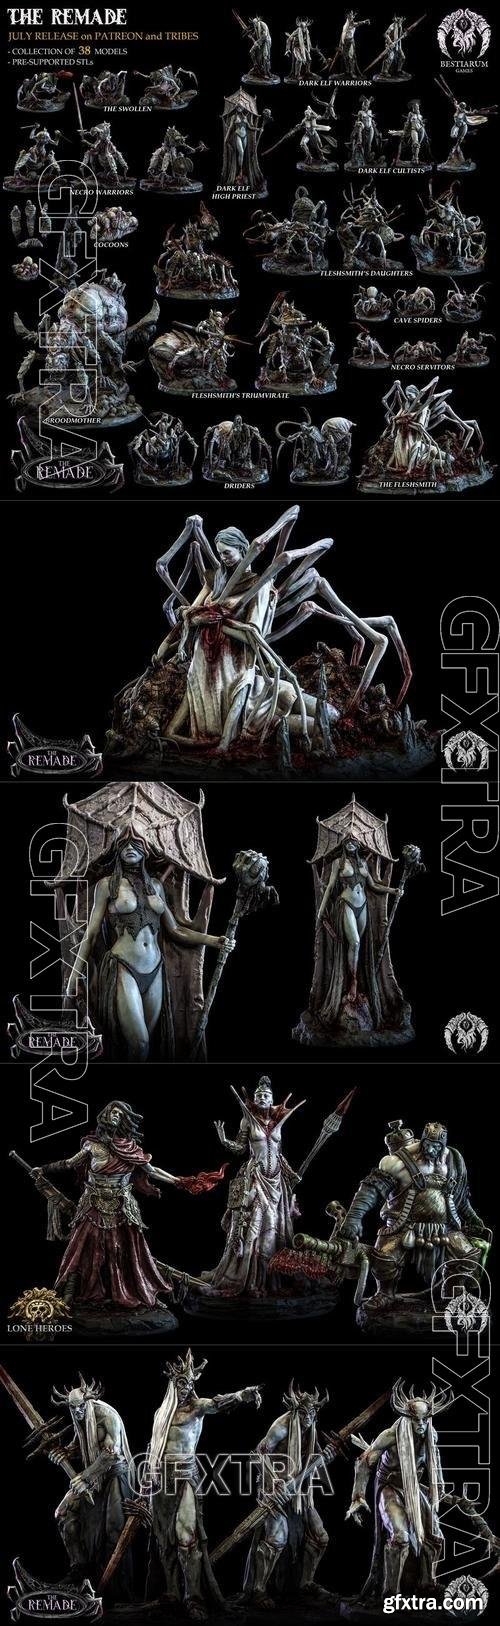 Bestiarum Miniatures - The Remade July 2022 3D